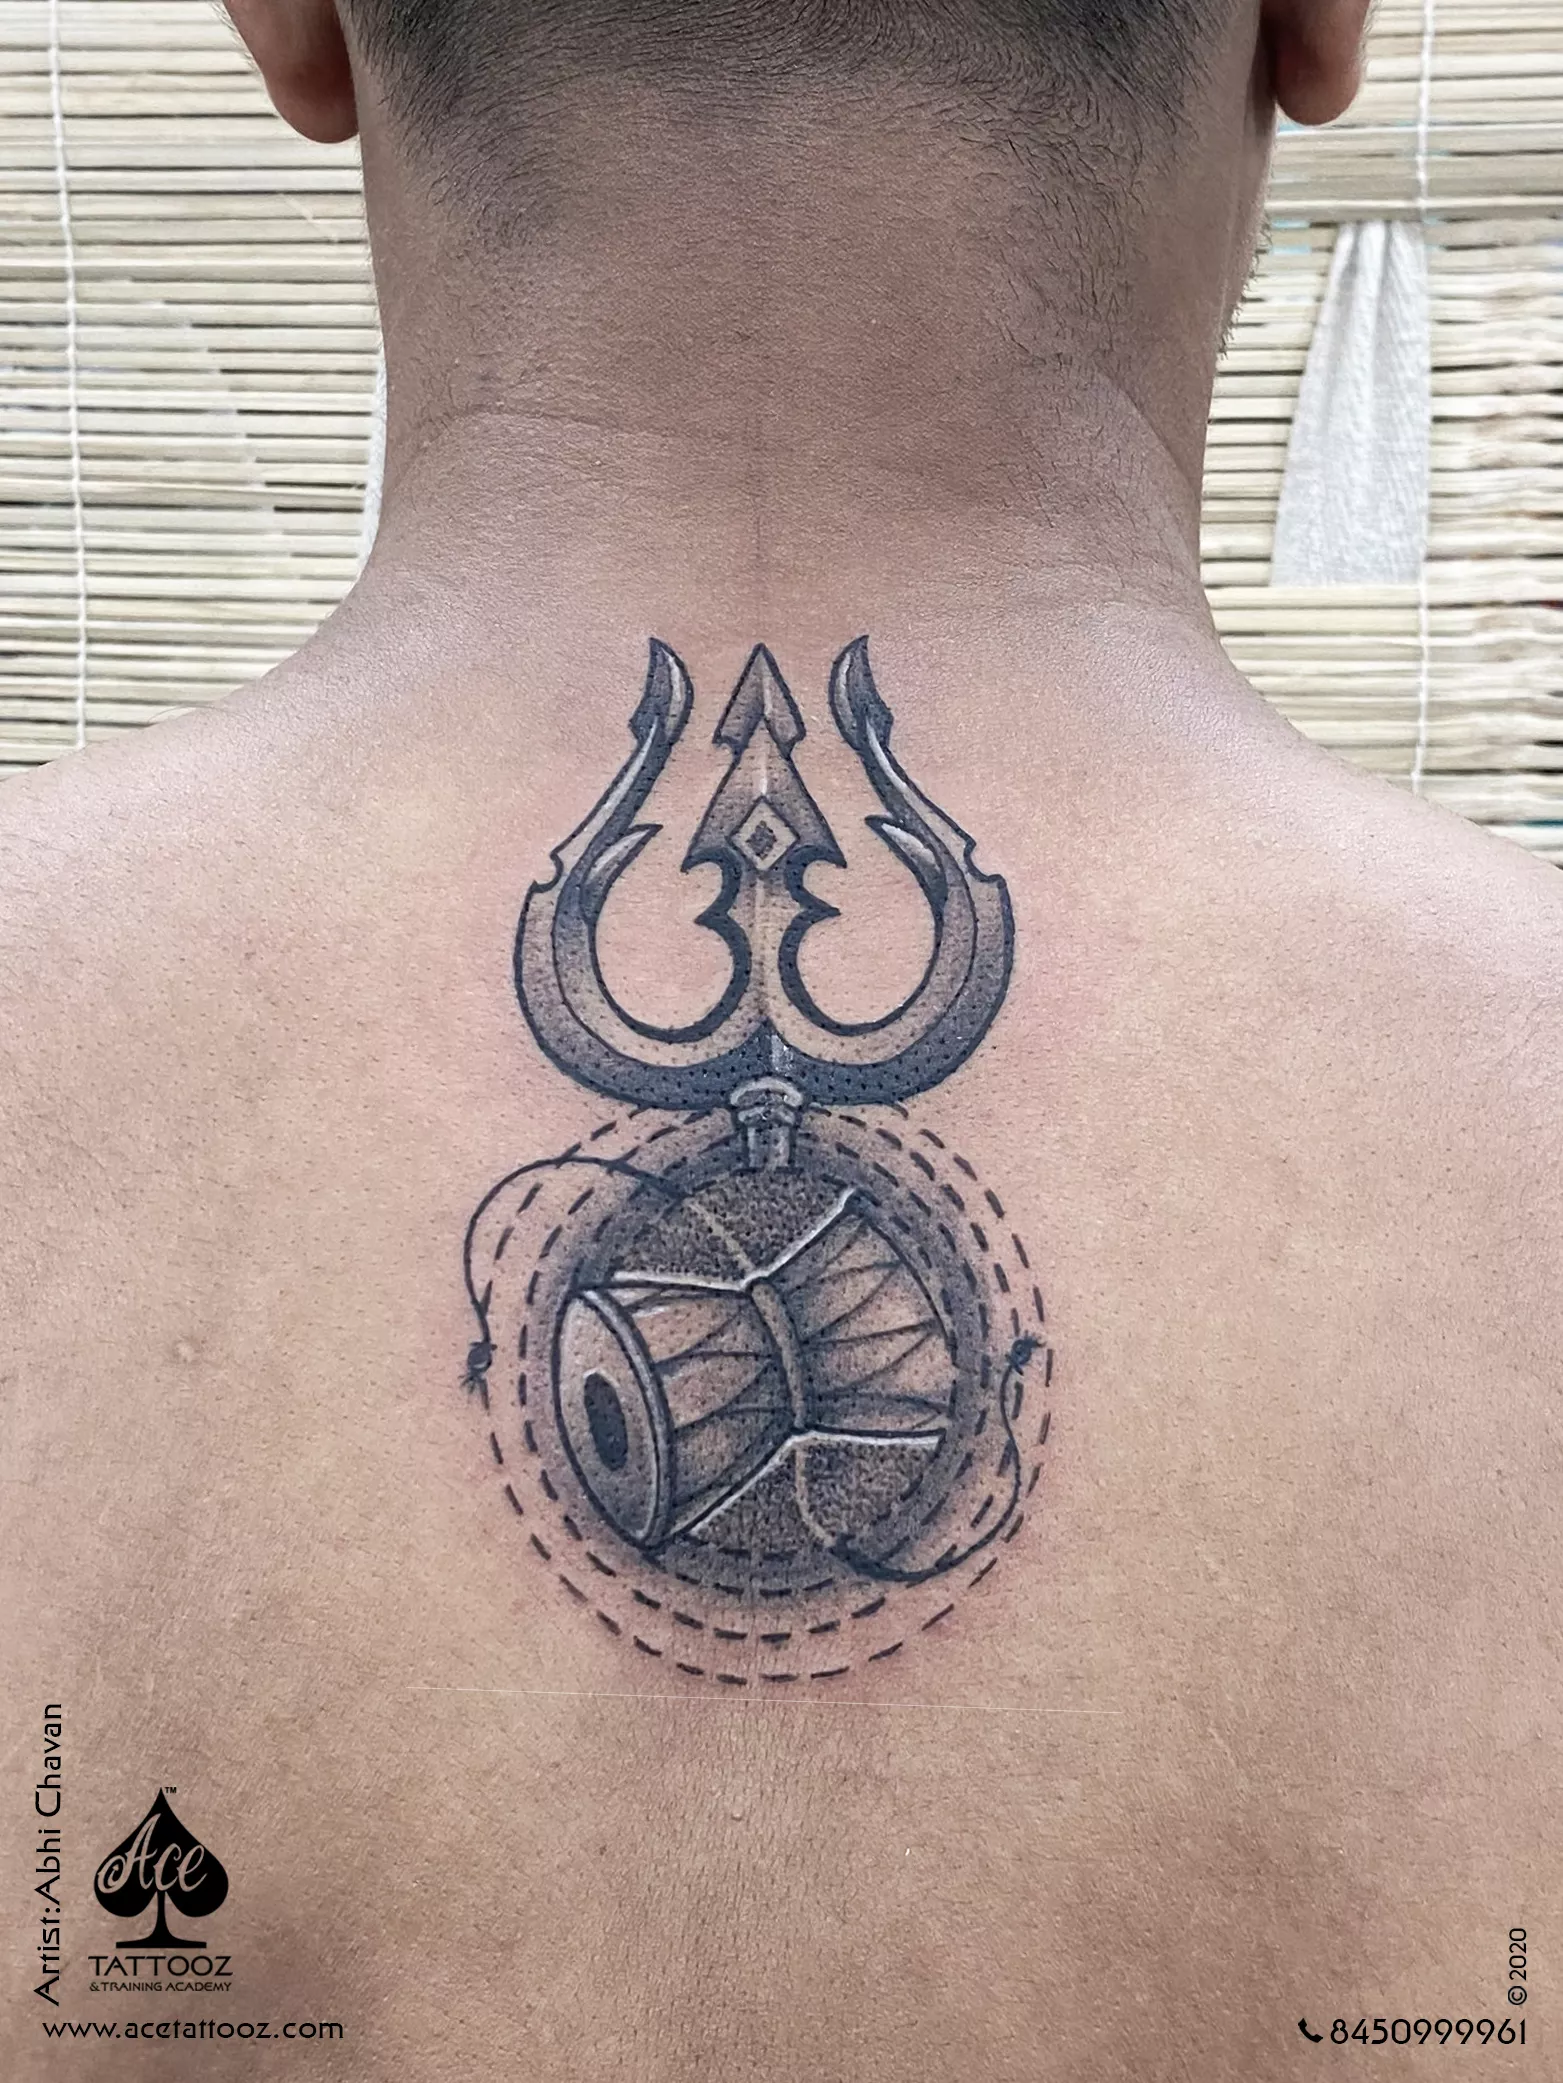 SKIN MACHINE TATTOO STUDIO on Instagram Lord Shiva trishul tattoo done by  our student Manikandan K Who was just a fresher before 2 months Enroll  learntattooswithskinmachine